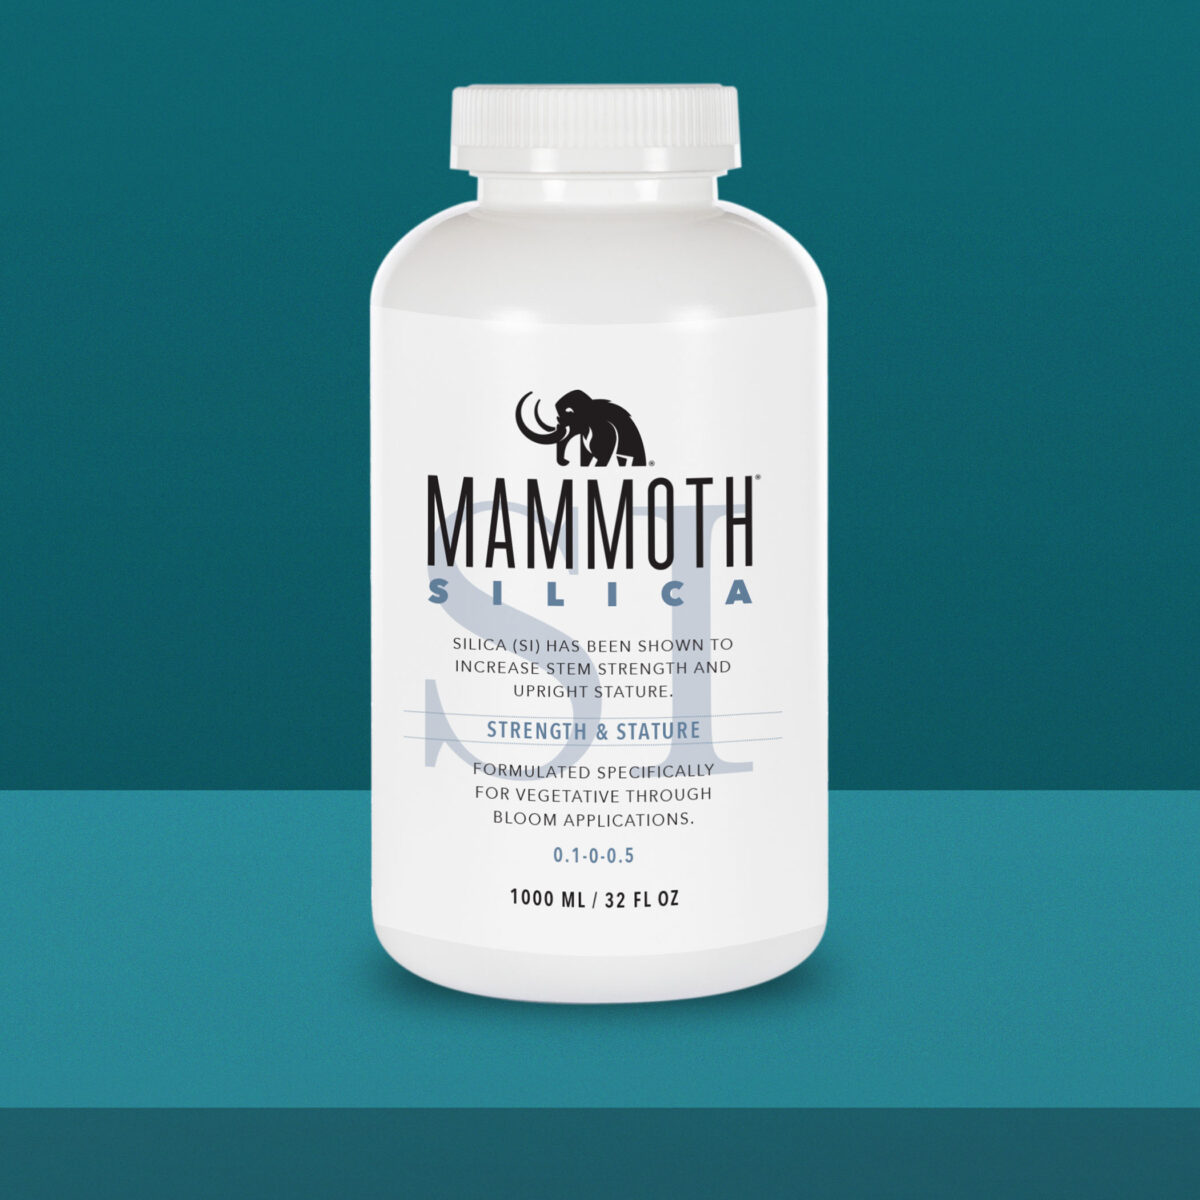 Mammoth Silica 1000mL Product Image